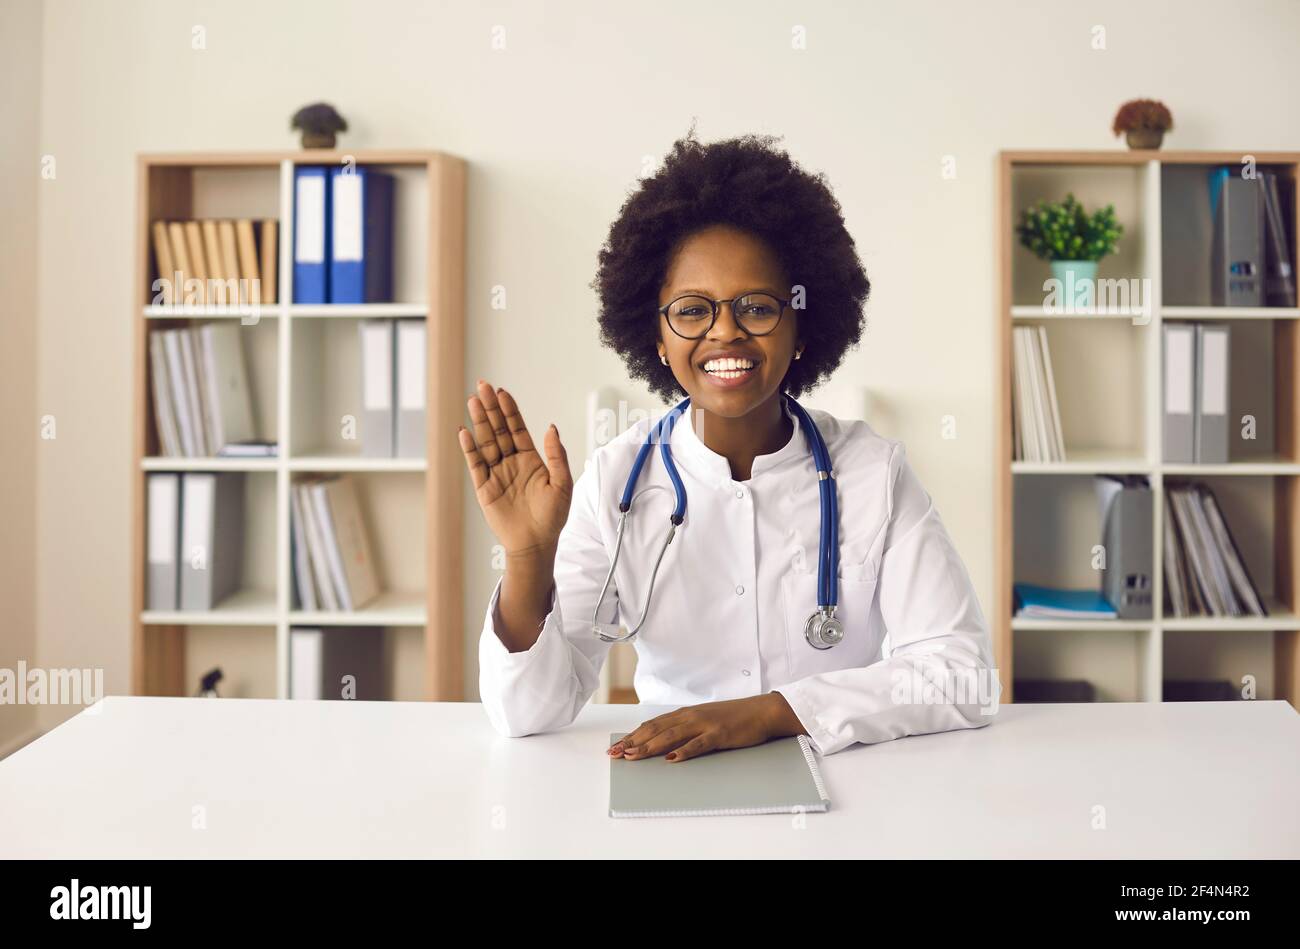 Friendly smiling african american woman doctor welcoming sit at desk in office Stock Photo